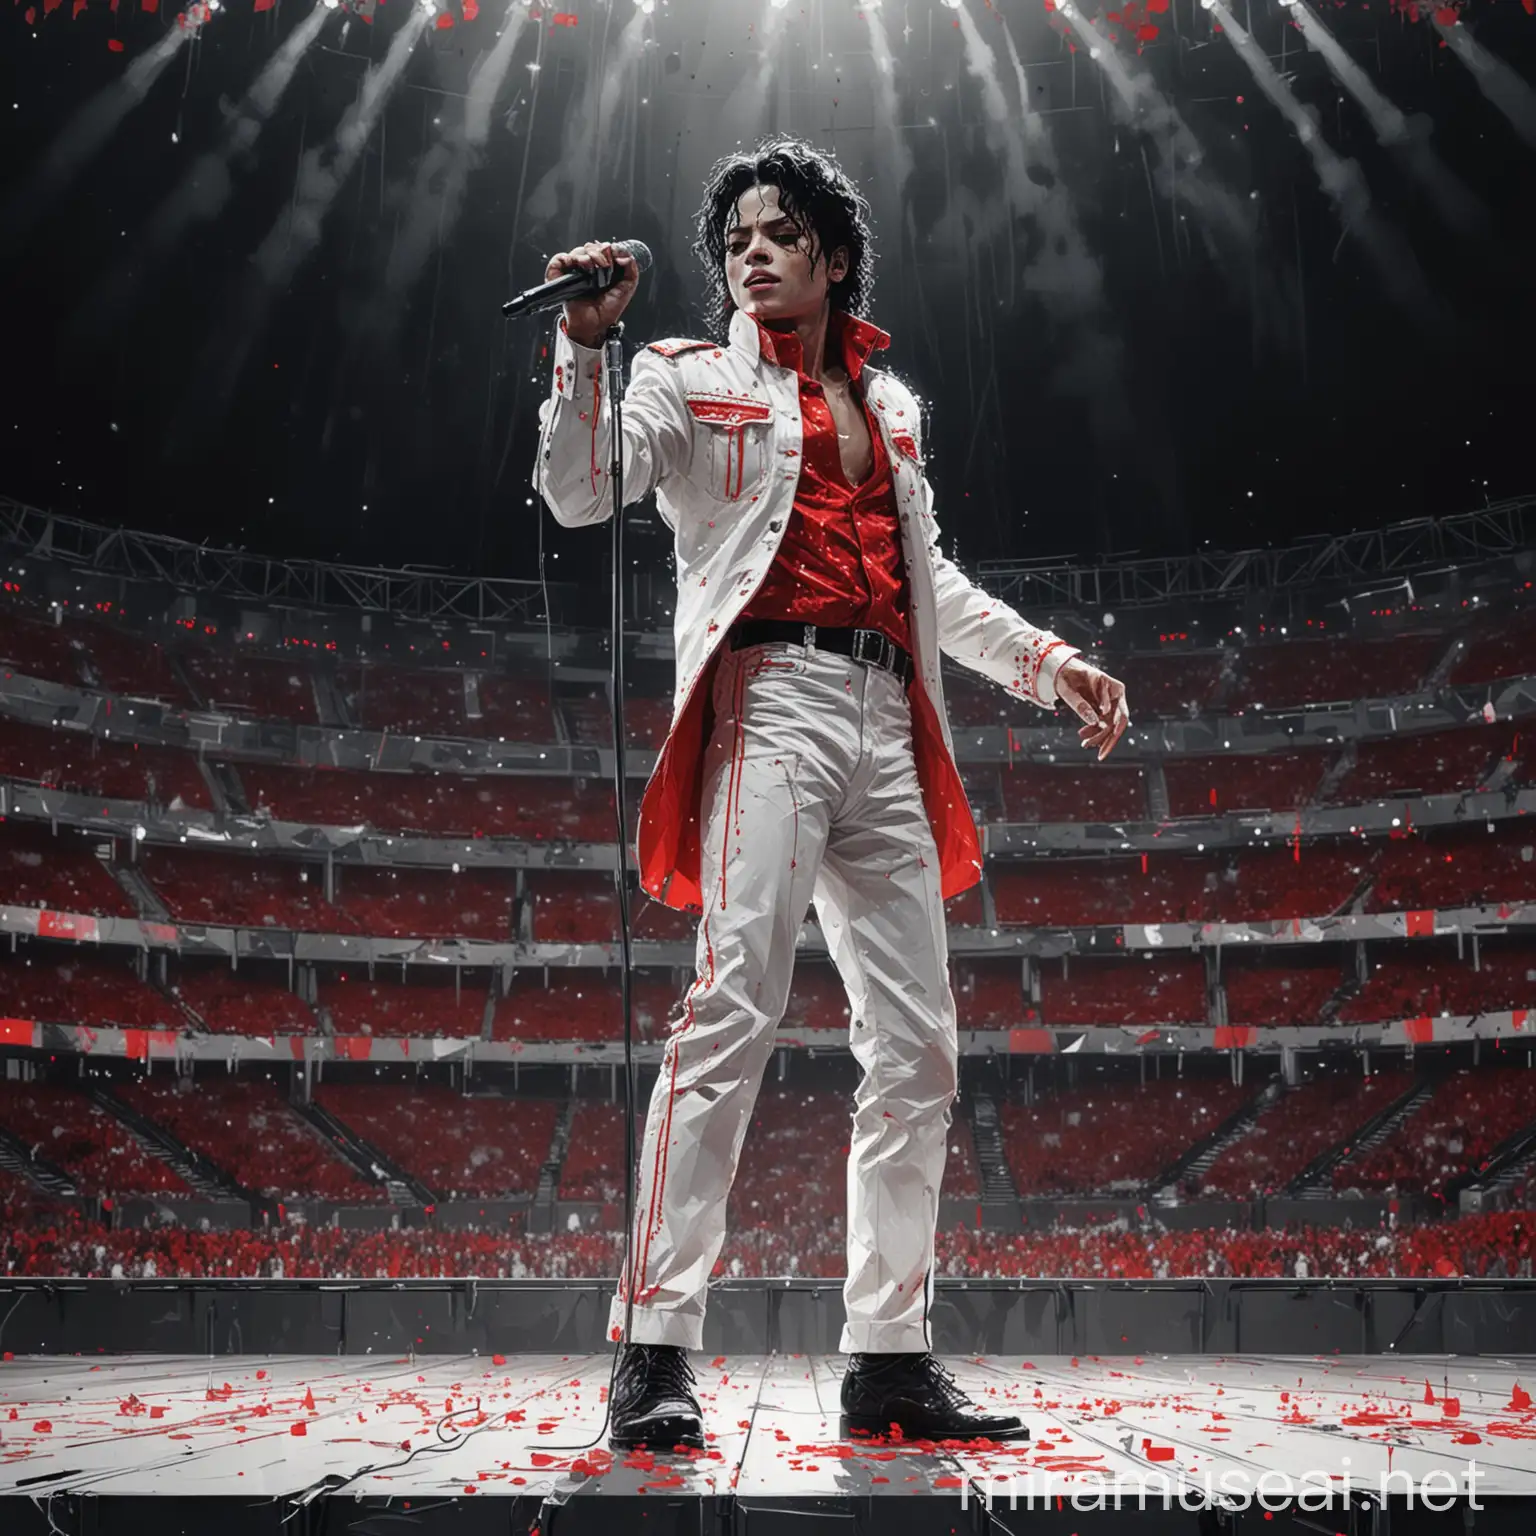 Michael Jackson Performing on Wide Stage in Monochrome with Red Highlights